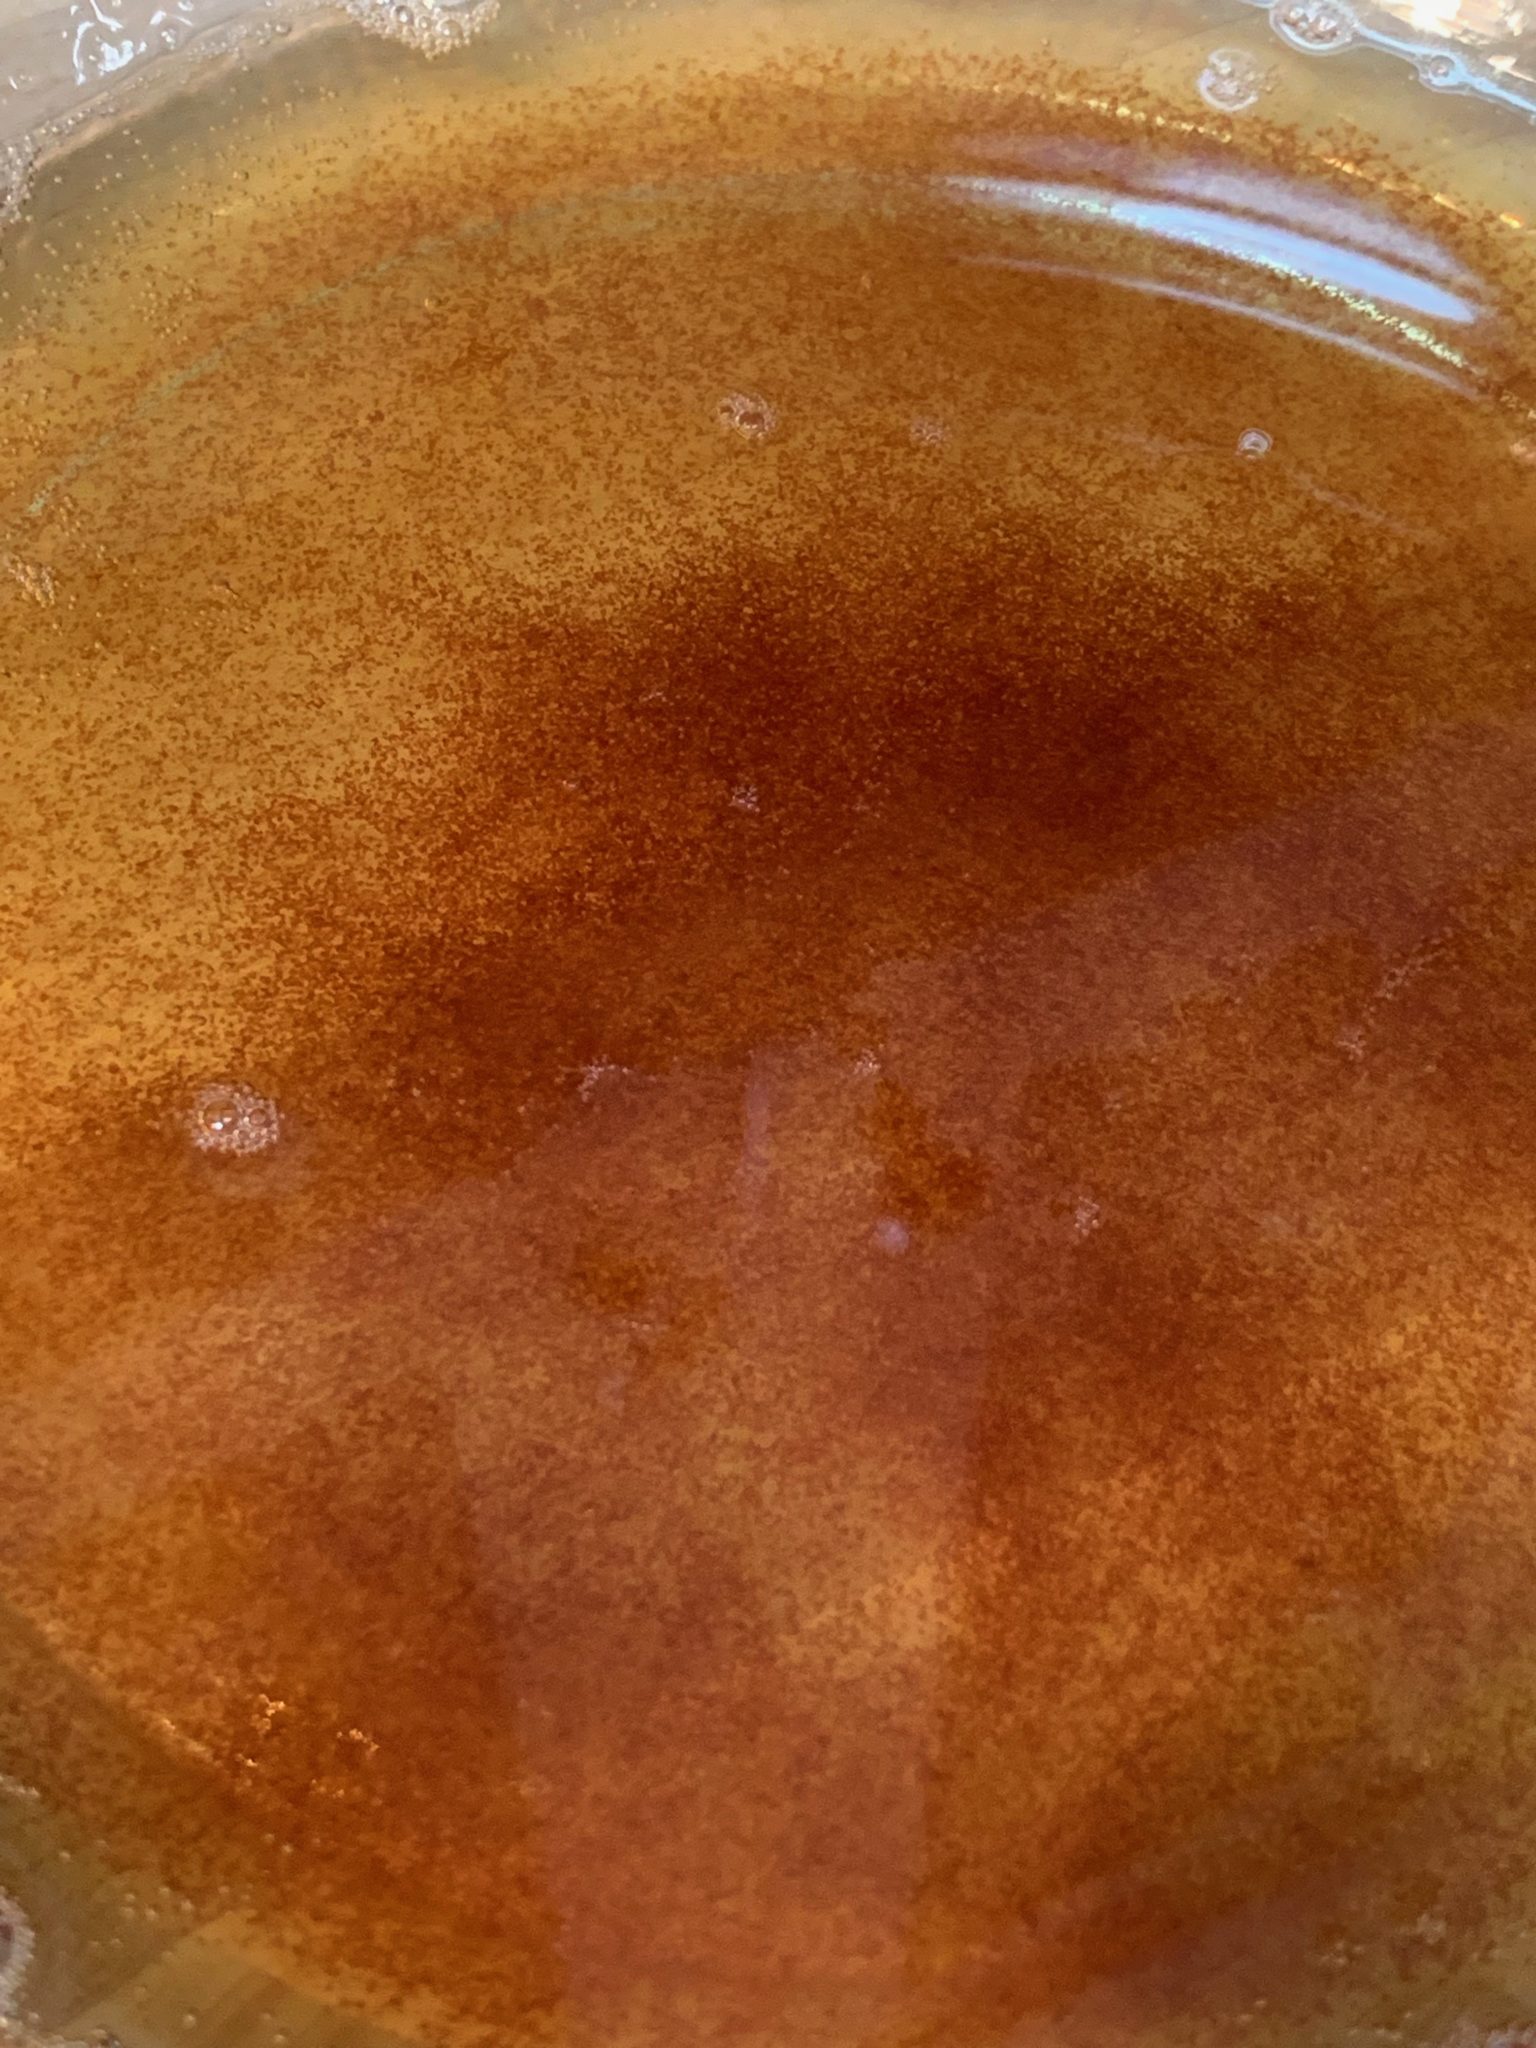 Browned butter